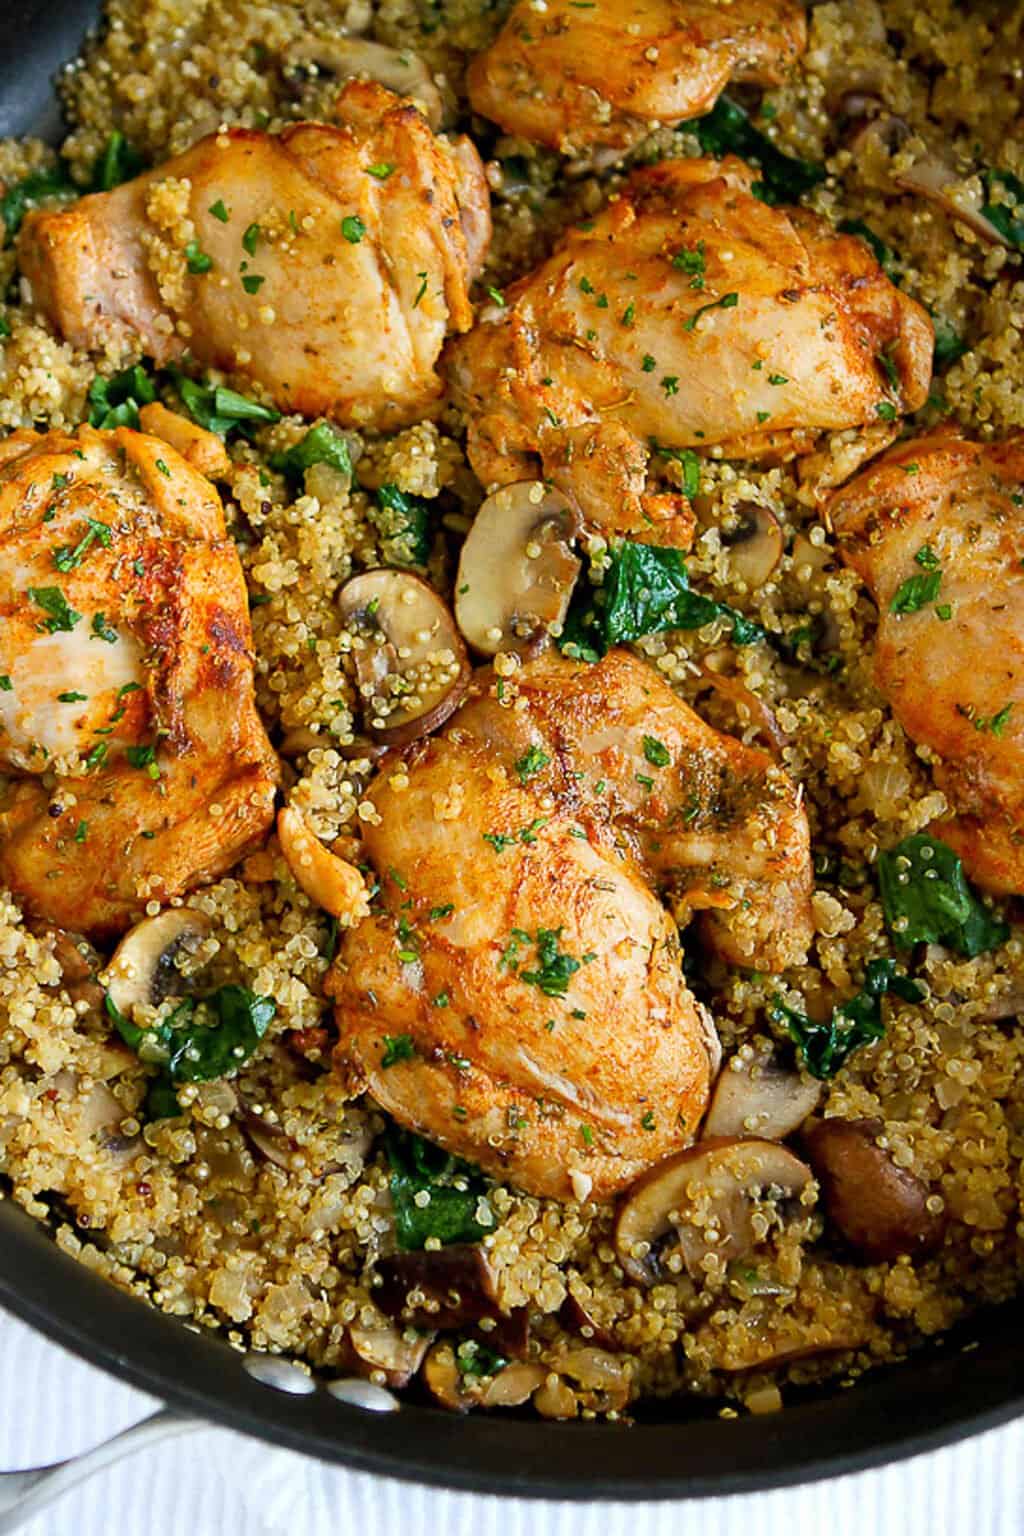 Chicken thighs, cooked quinoa, mushrooms and spinach in a black skillet.